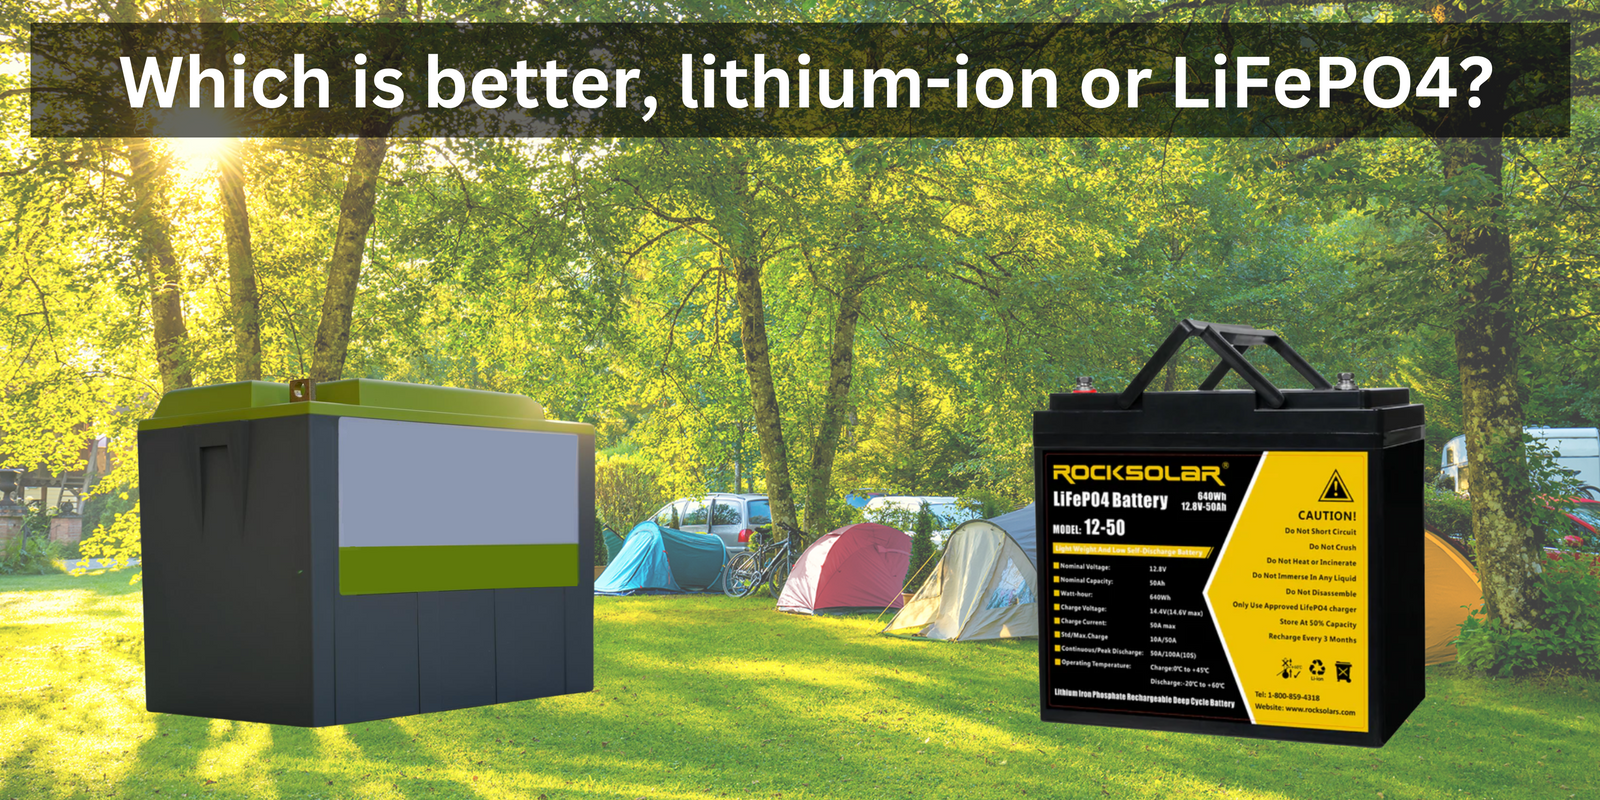 Which is better, lithium-ion or LiFePO4?